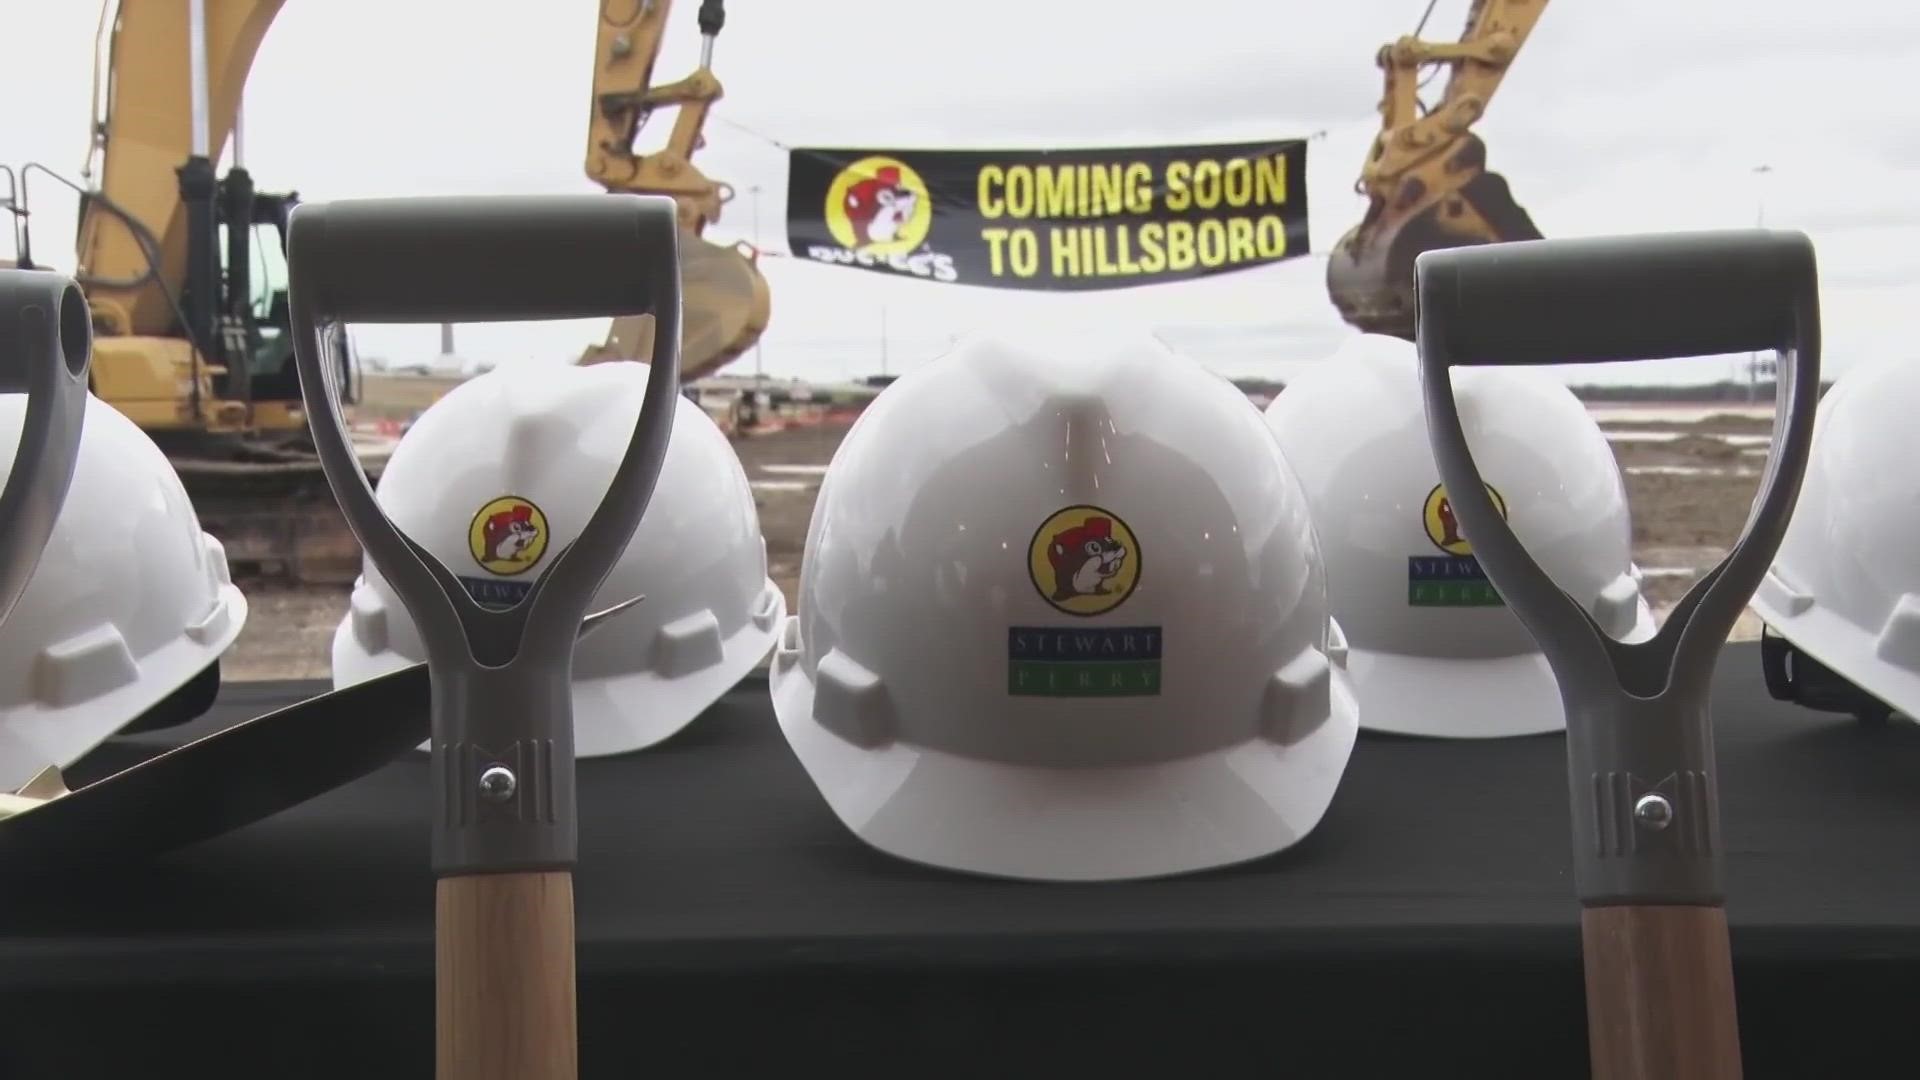 This Buc-ee's will be located off of North Interstate 35 and Highway 77.